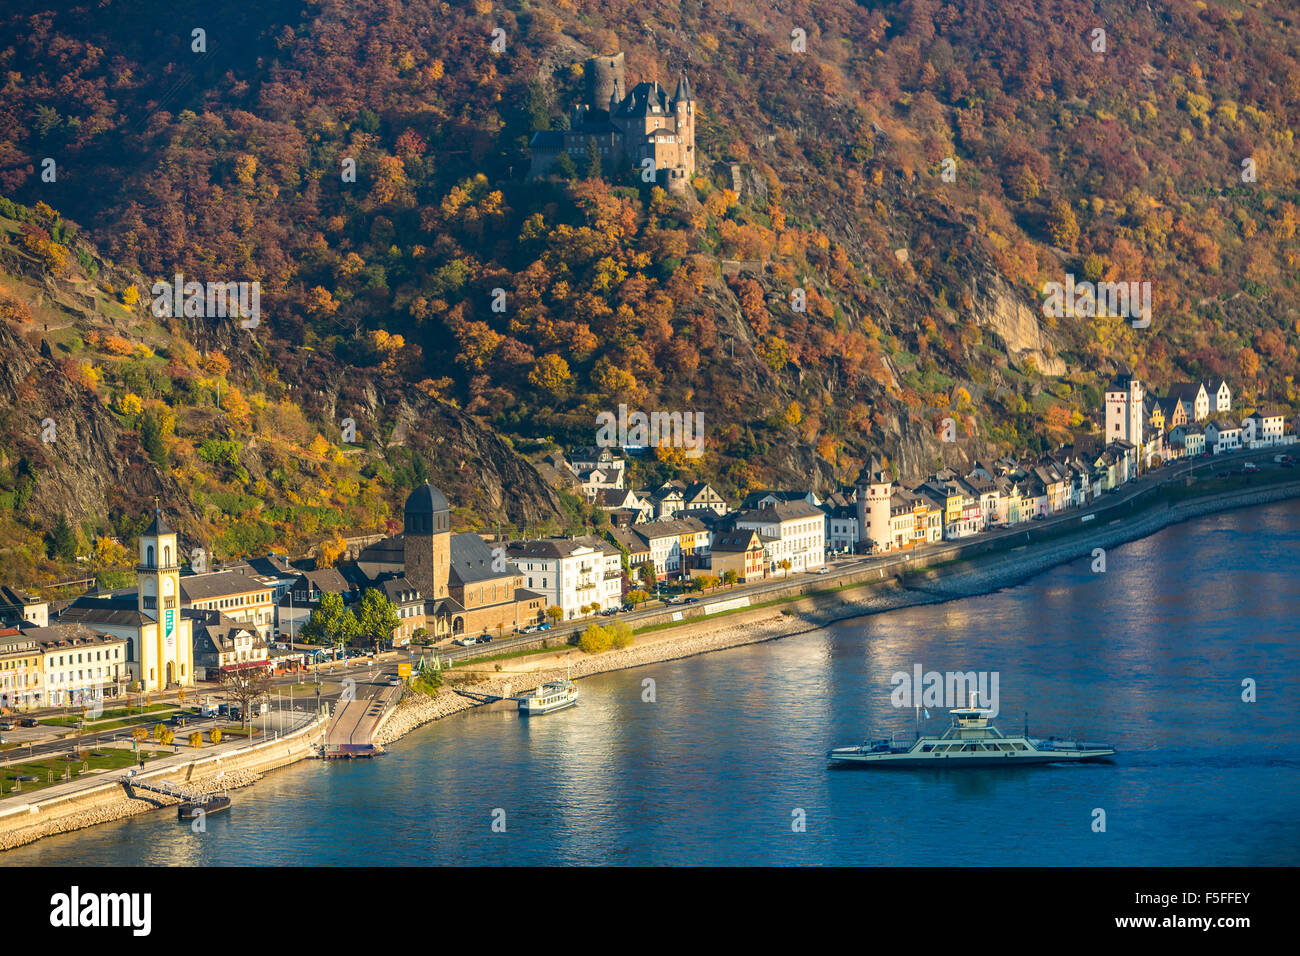 Katz castle, above St. Goarshausen, Upper Middle Rhine valley, Germany, car ferry, Stock Photo